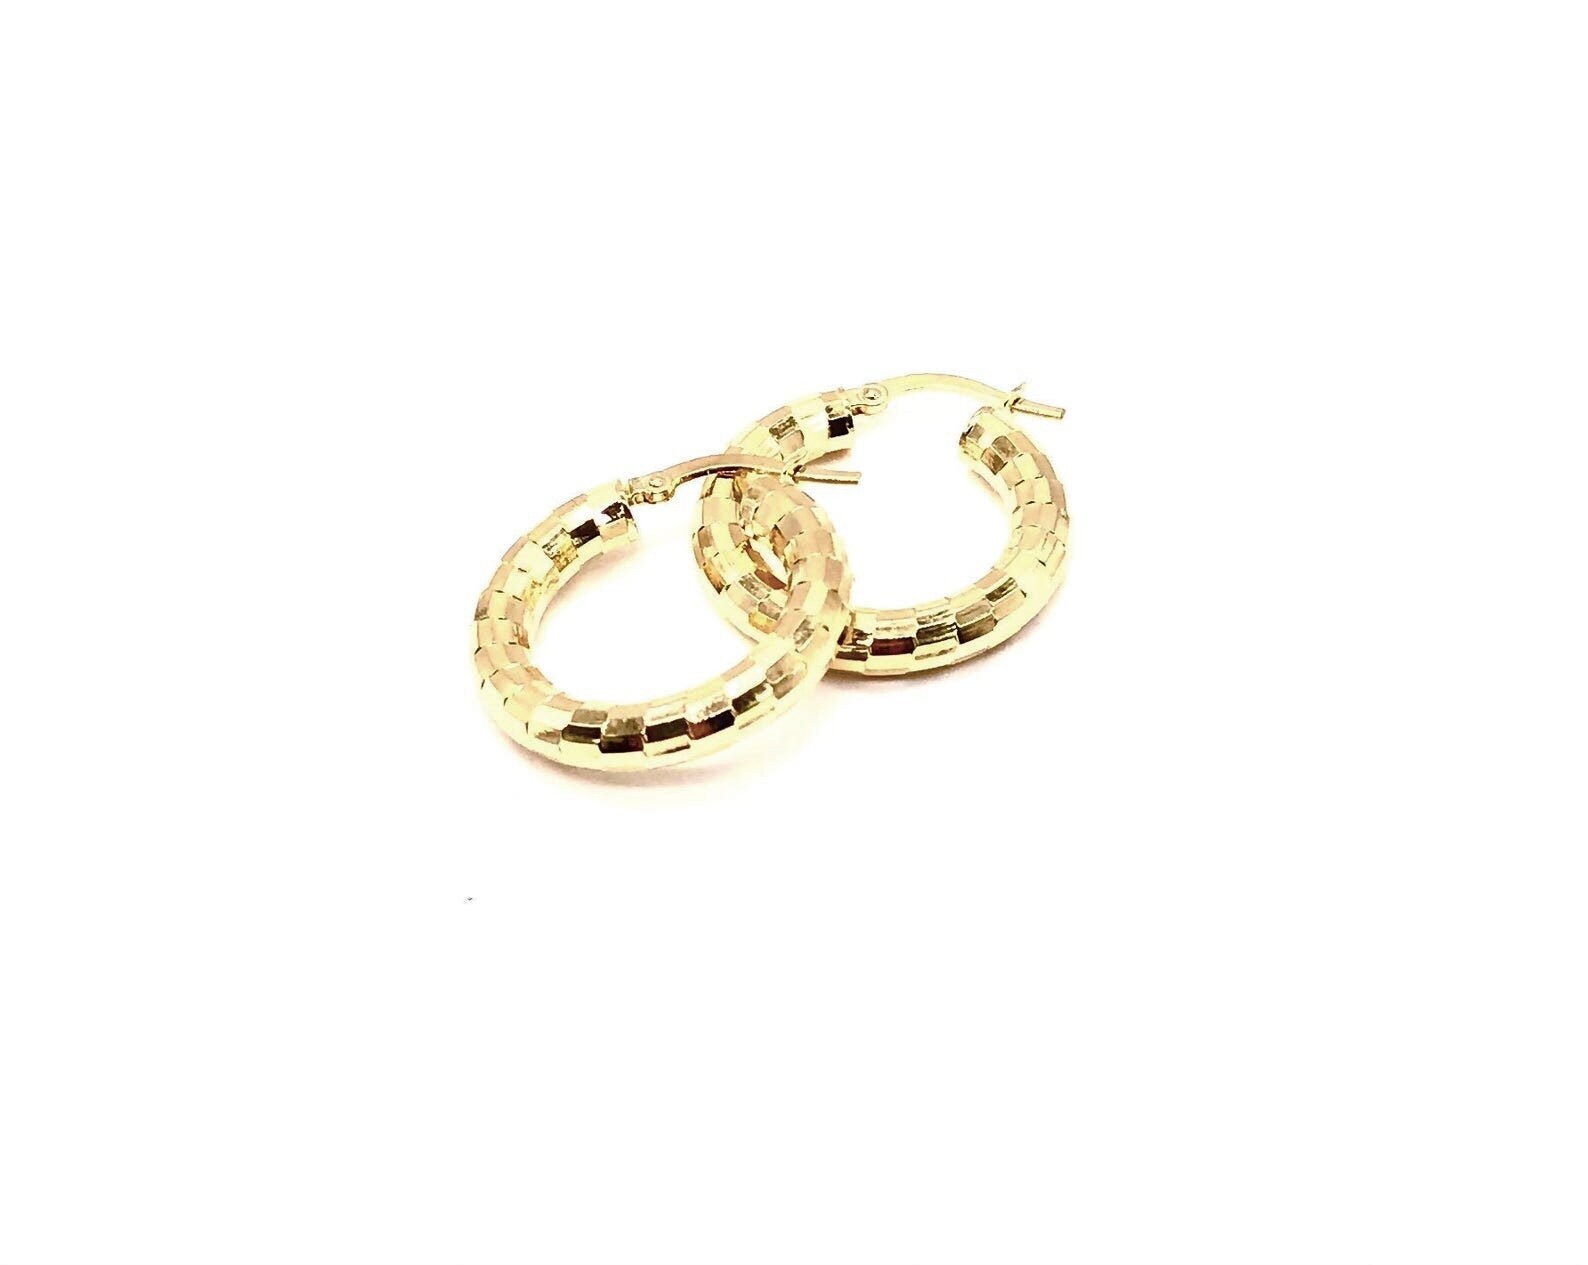 18K Yellow Gold Shiny Hoop Earrings Real 18K Sparkling Hoops Italian Design Diamond Cut Gift For Her Made in Italy